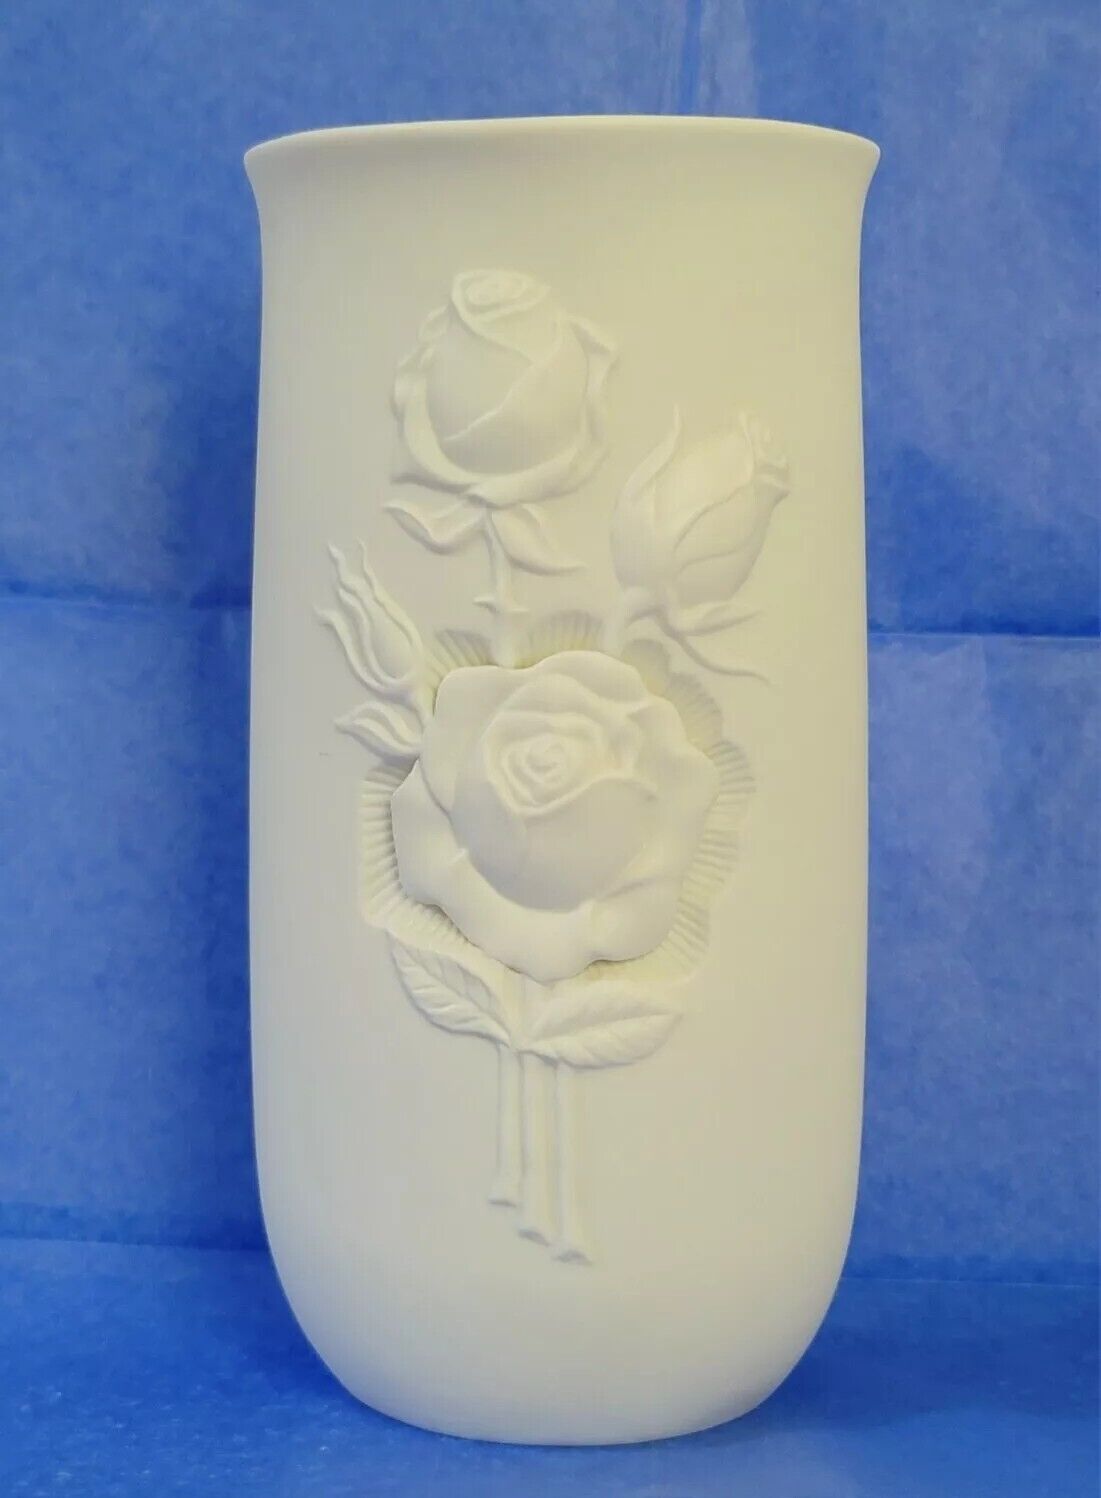 KAISER White Bisque PORCELAIN VASE #0713 ROSES by Frey - Raised Relief - Germany